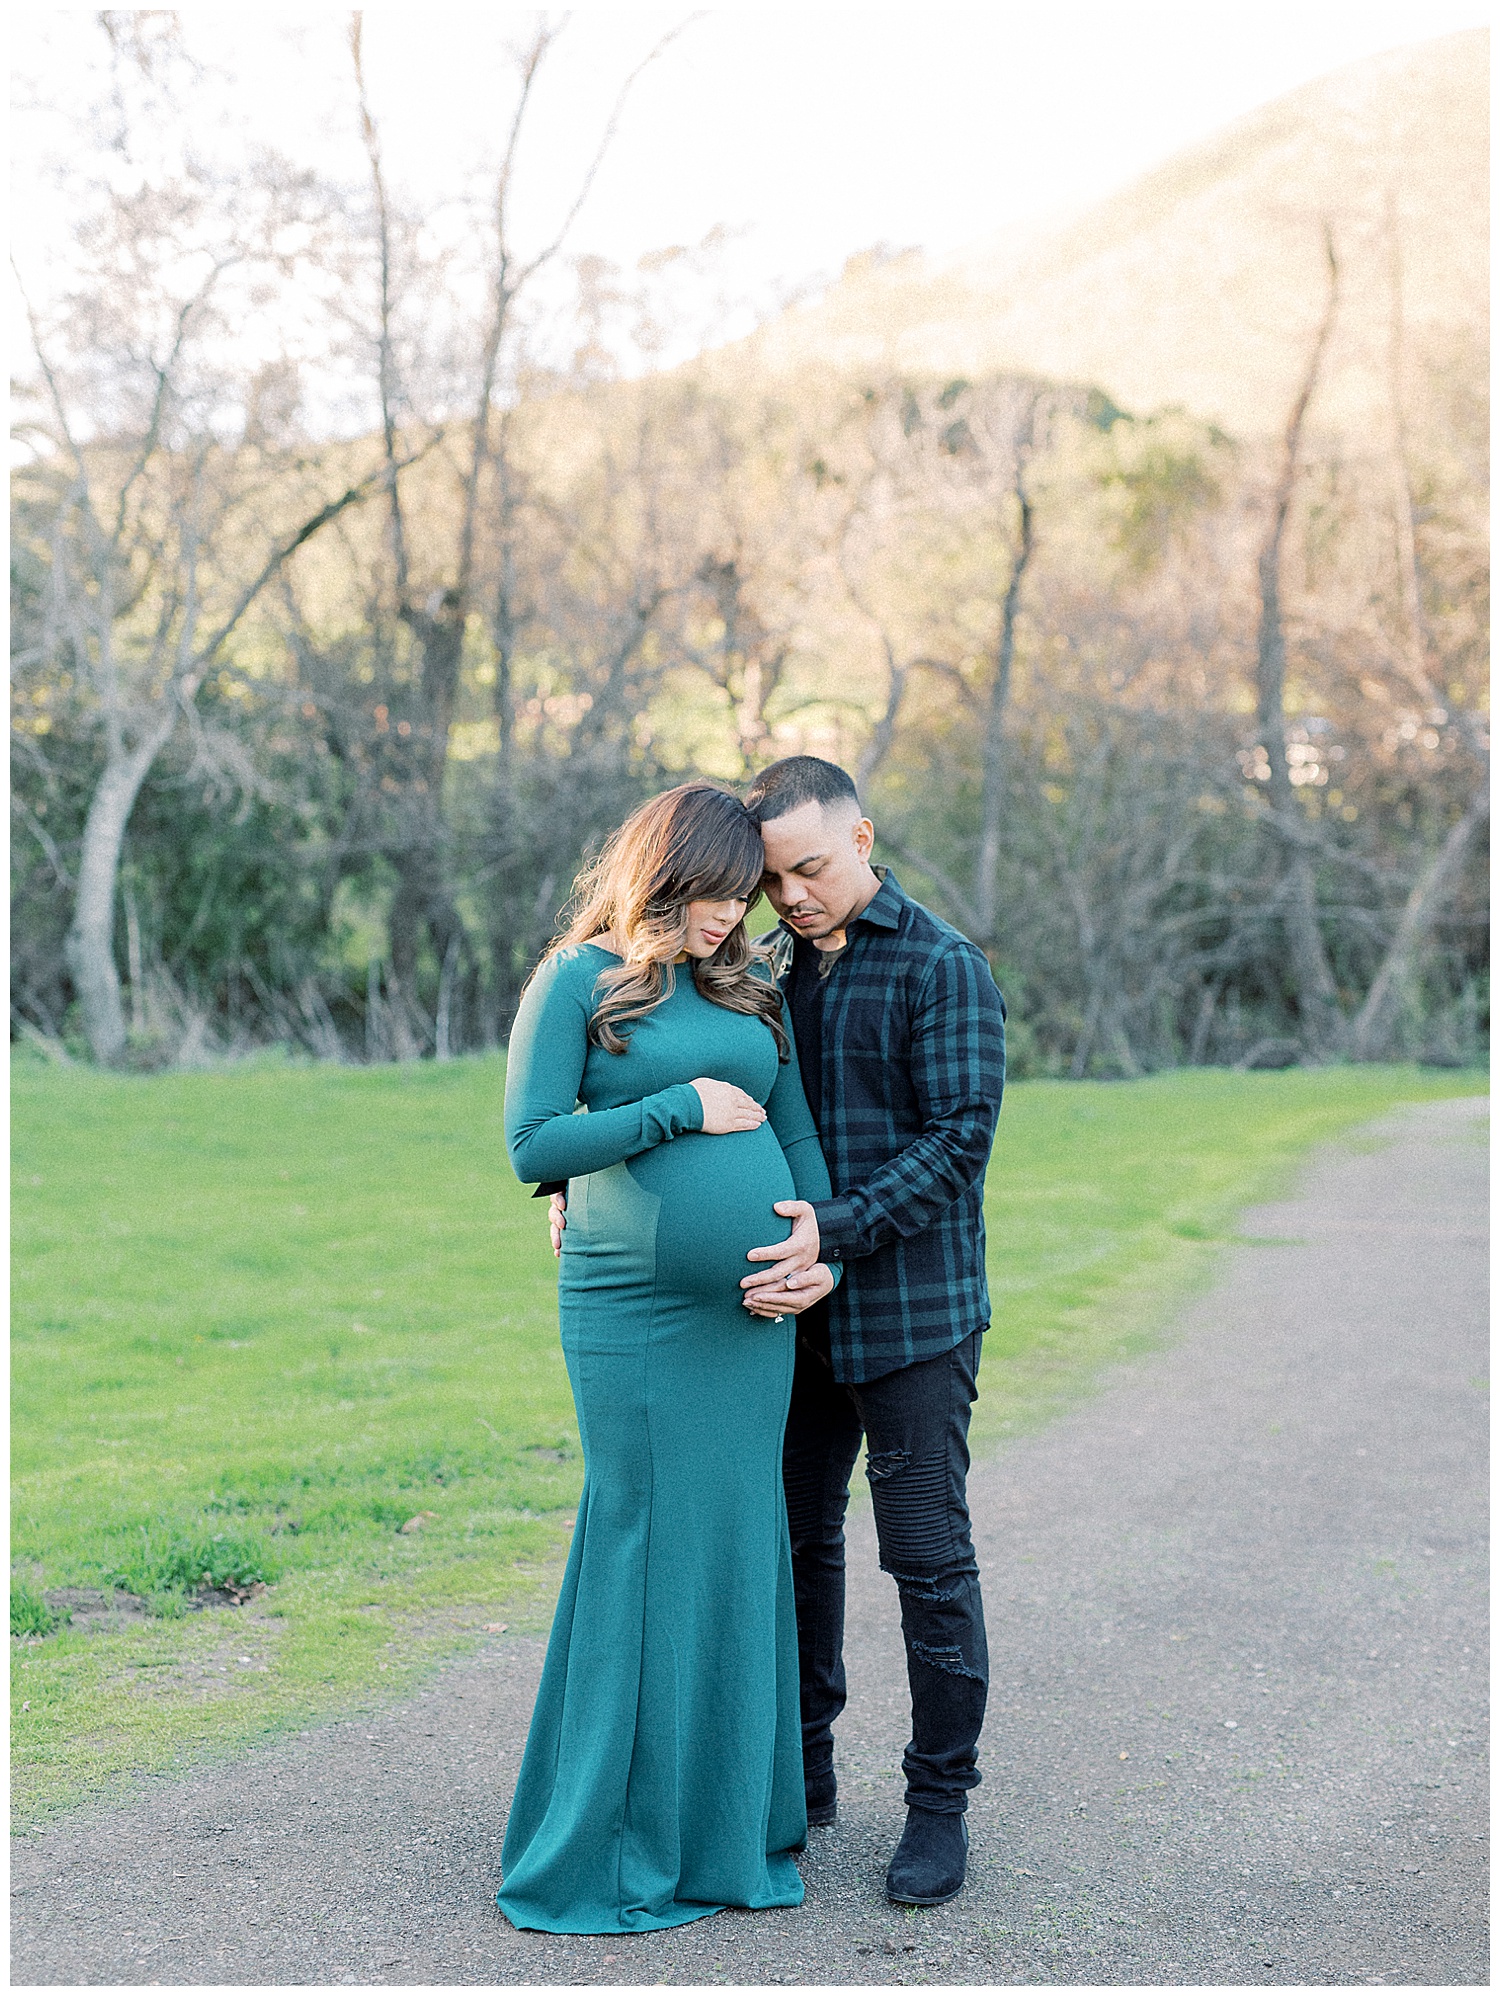 san francisco wedding and portrait photographer doing a maternity session in garin park fremont california, maternity photo with husband